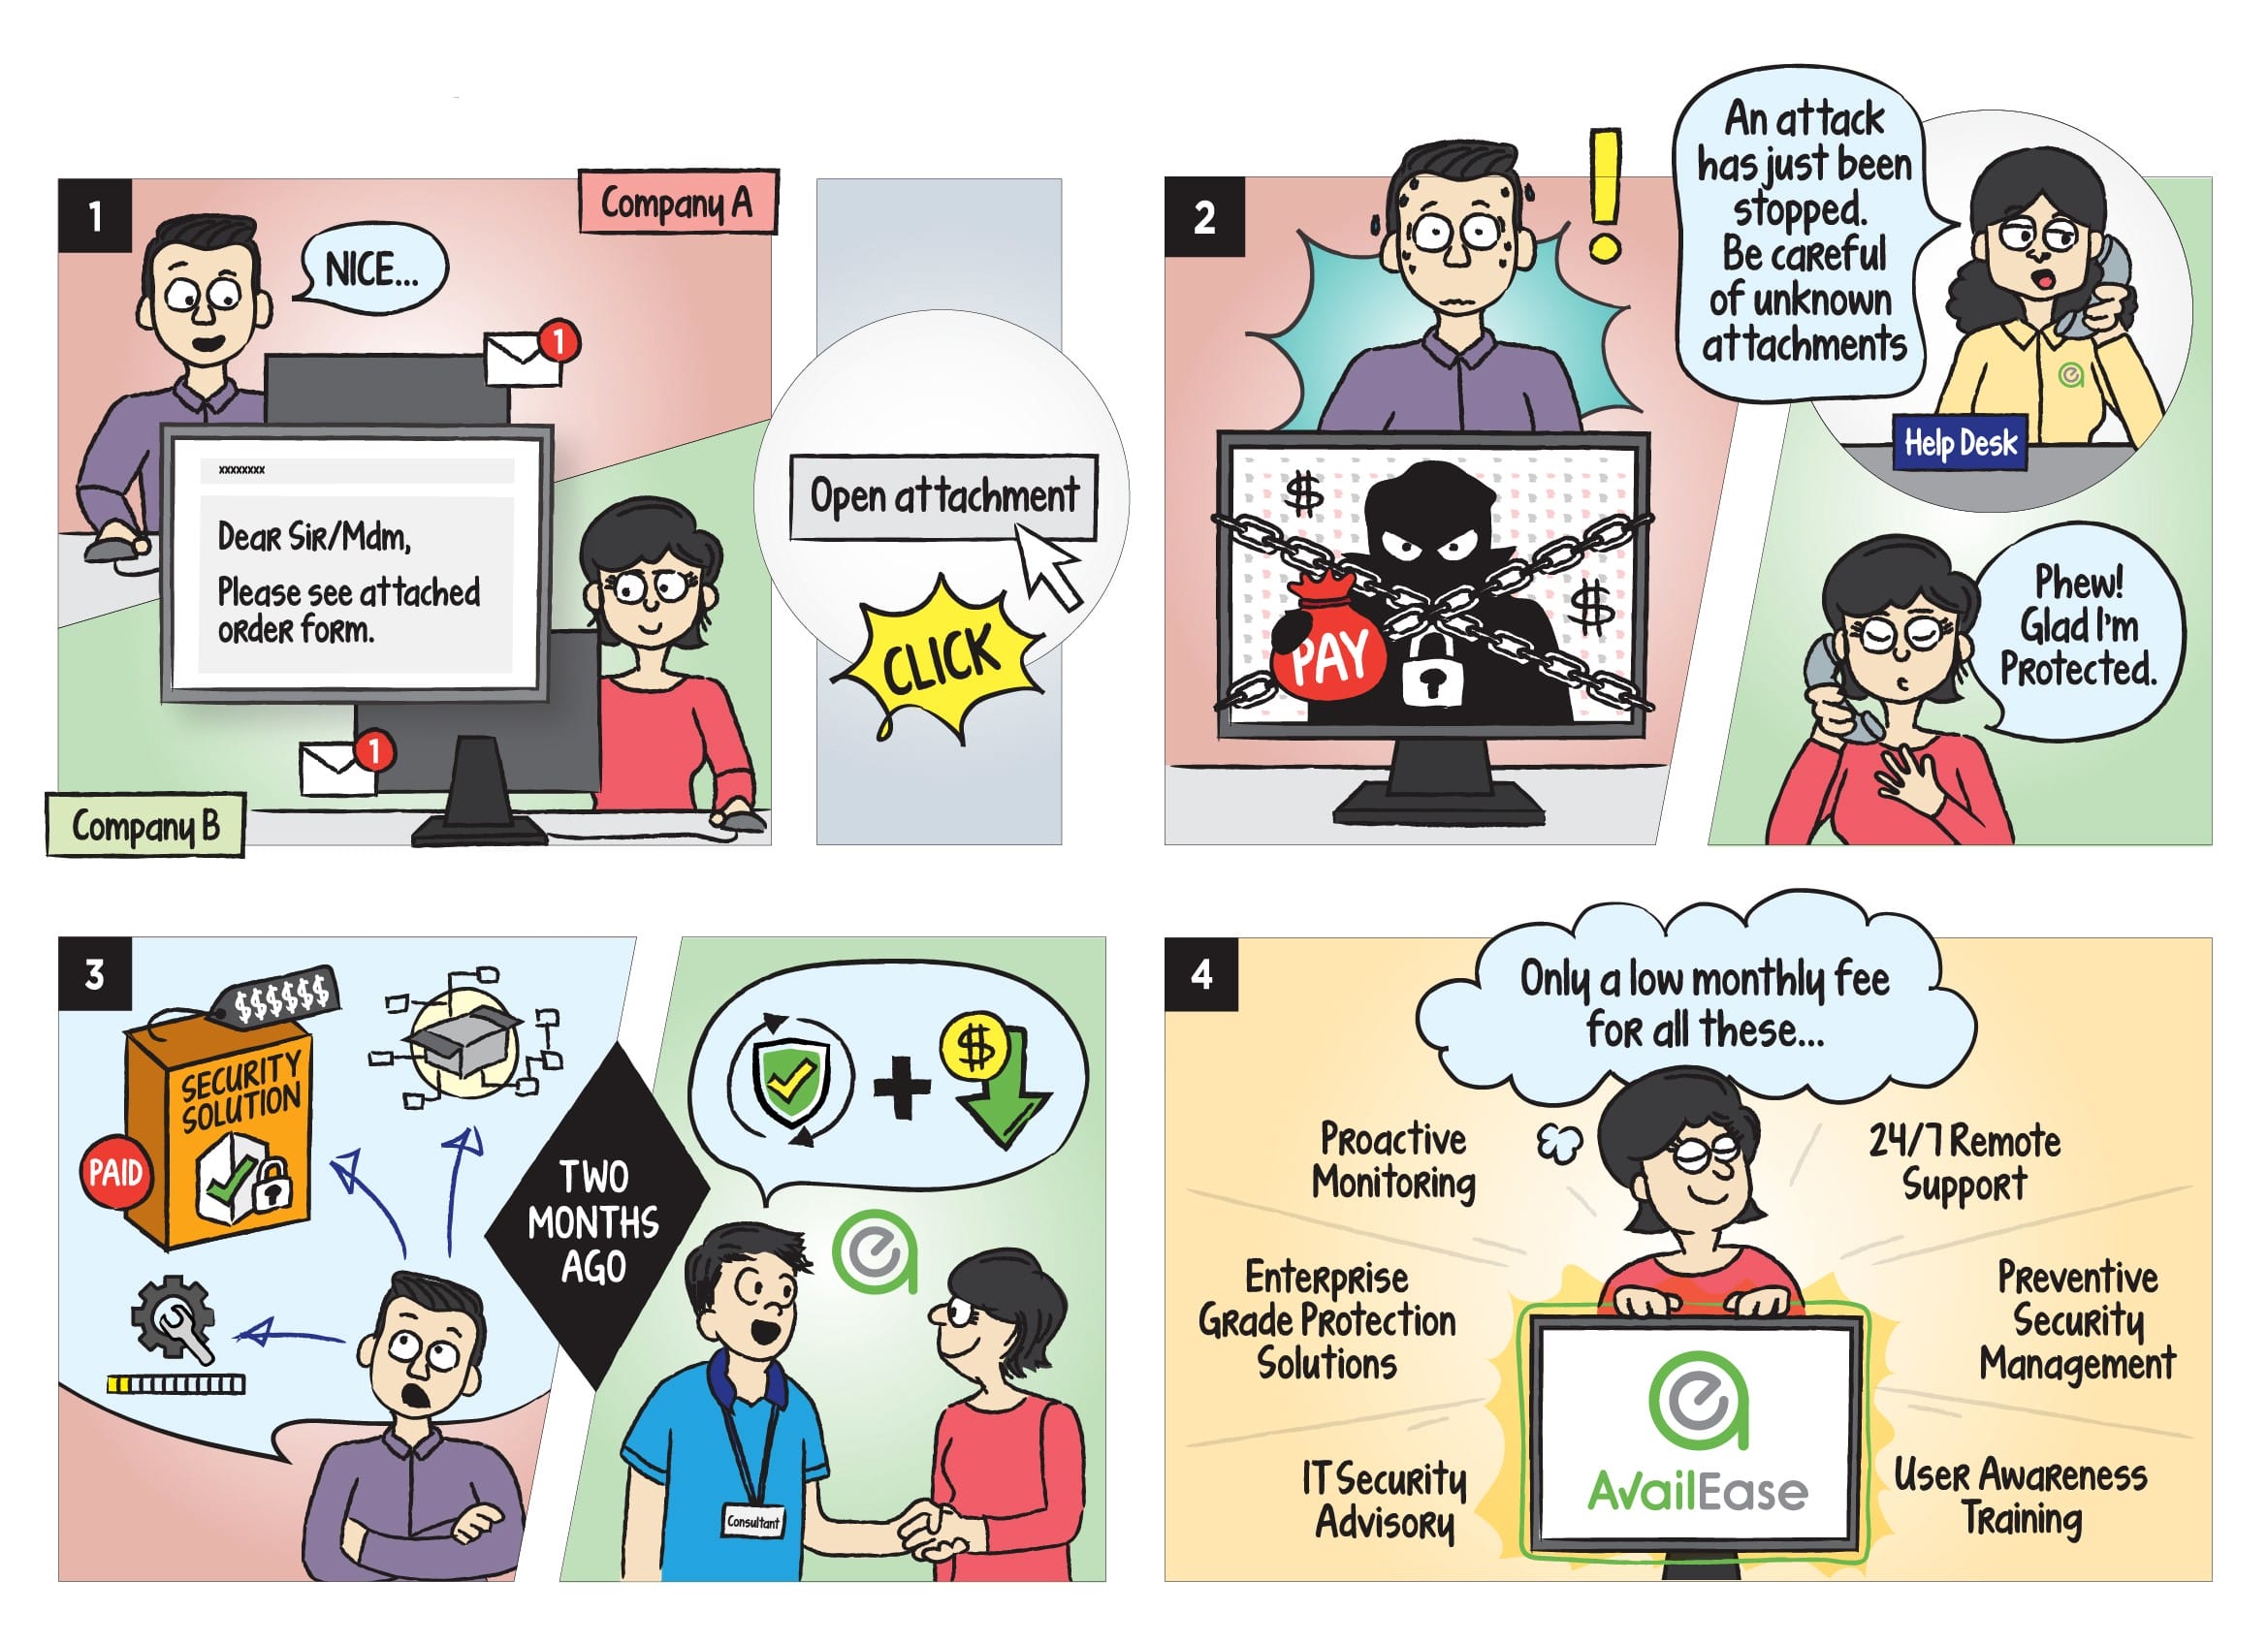 Comic strip illustrate risk of ransomware and managed security services provided by AvailEase